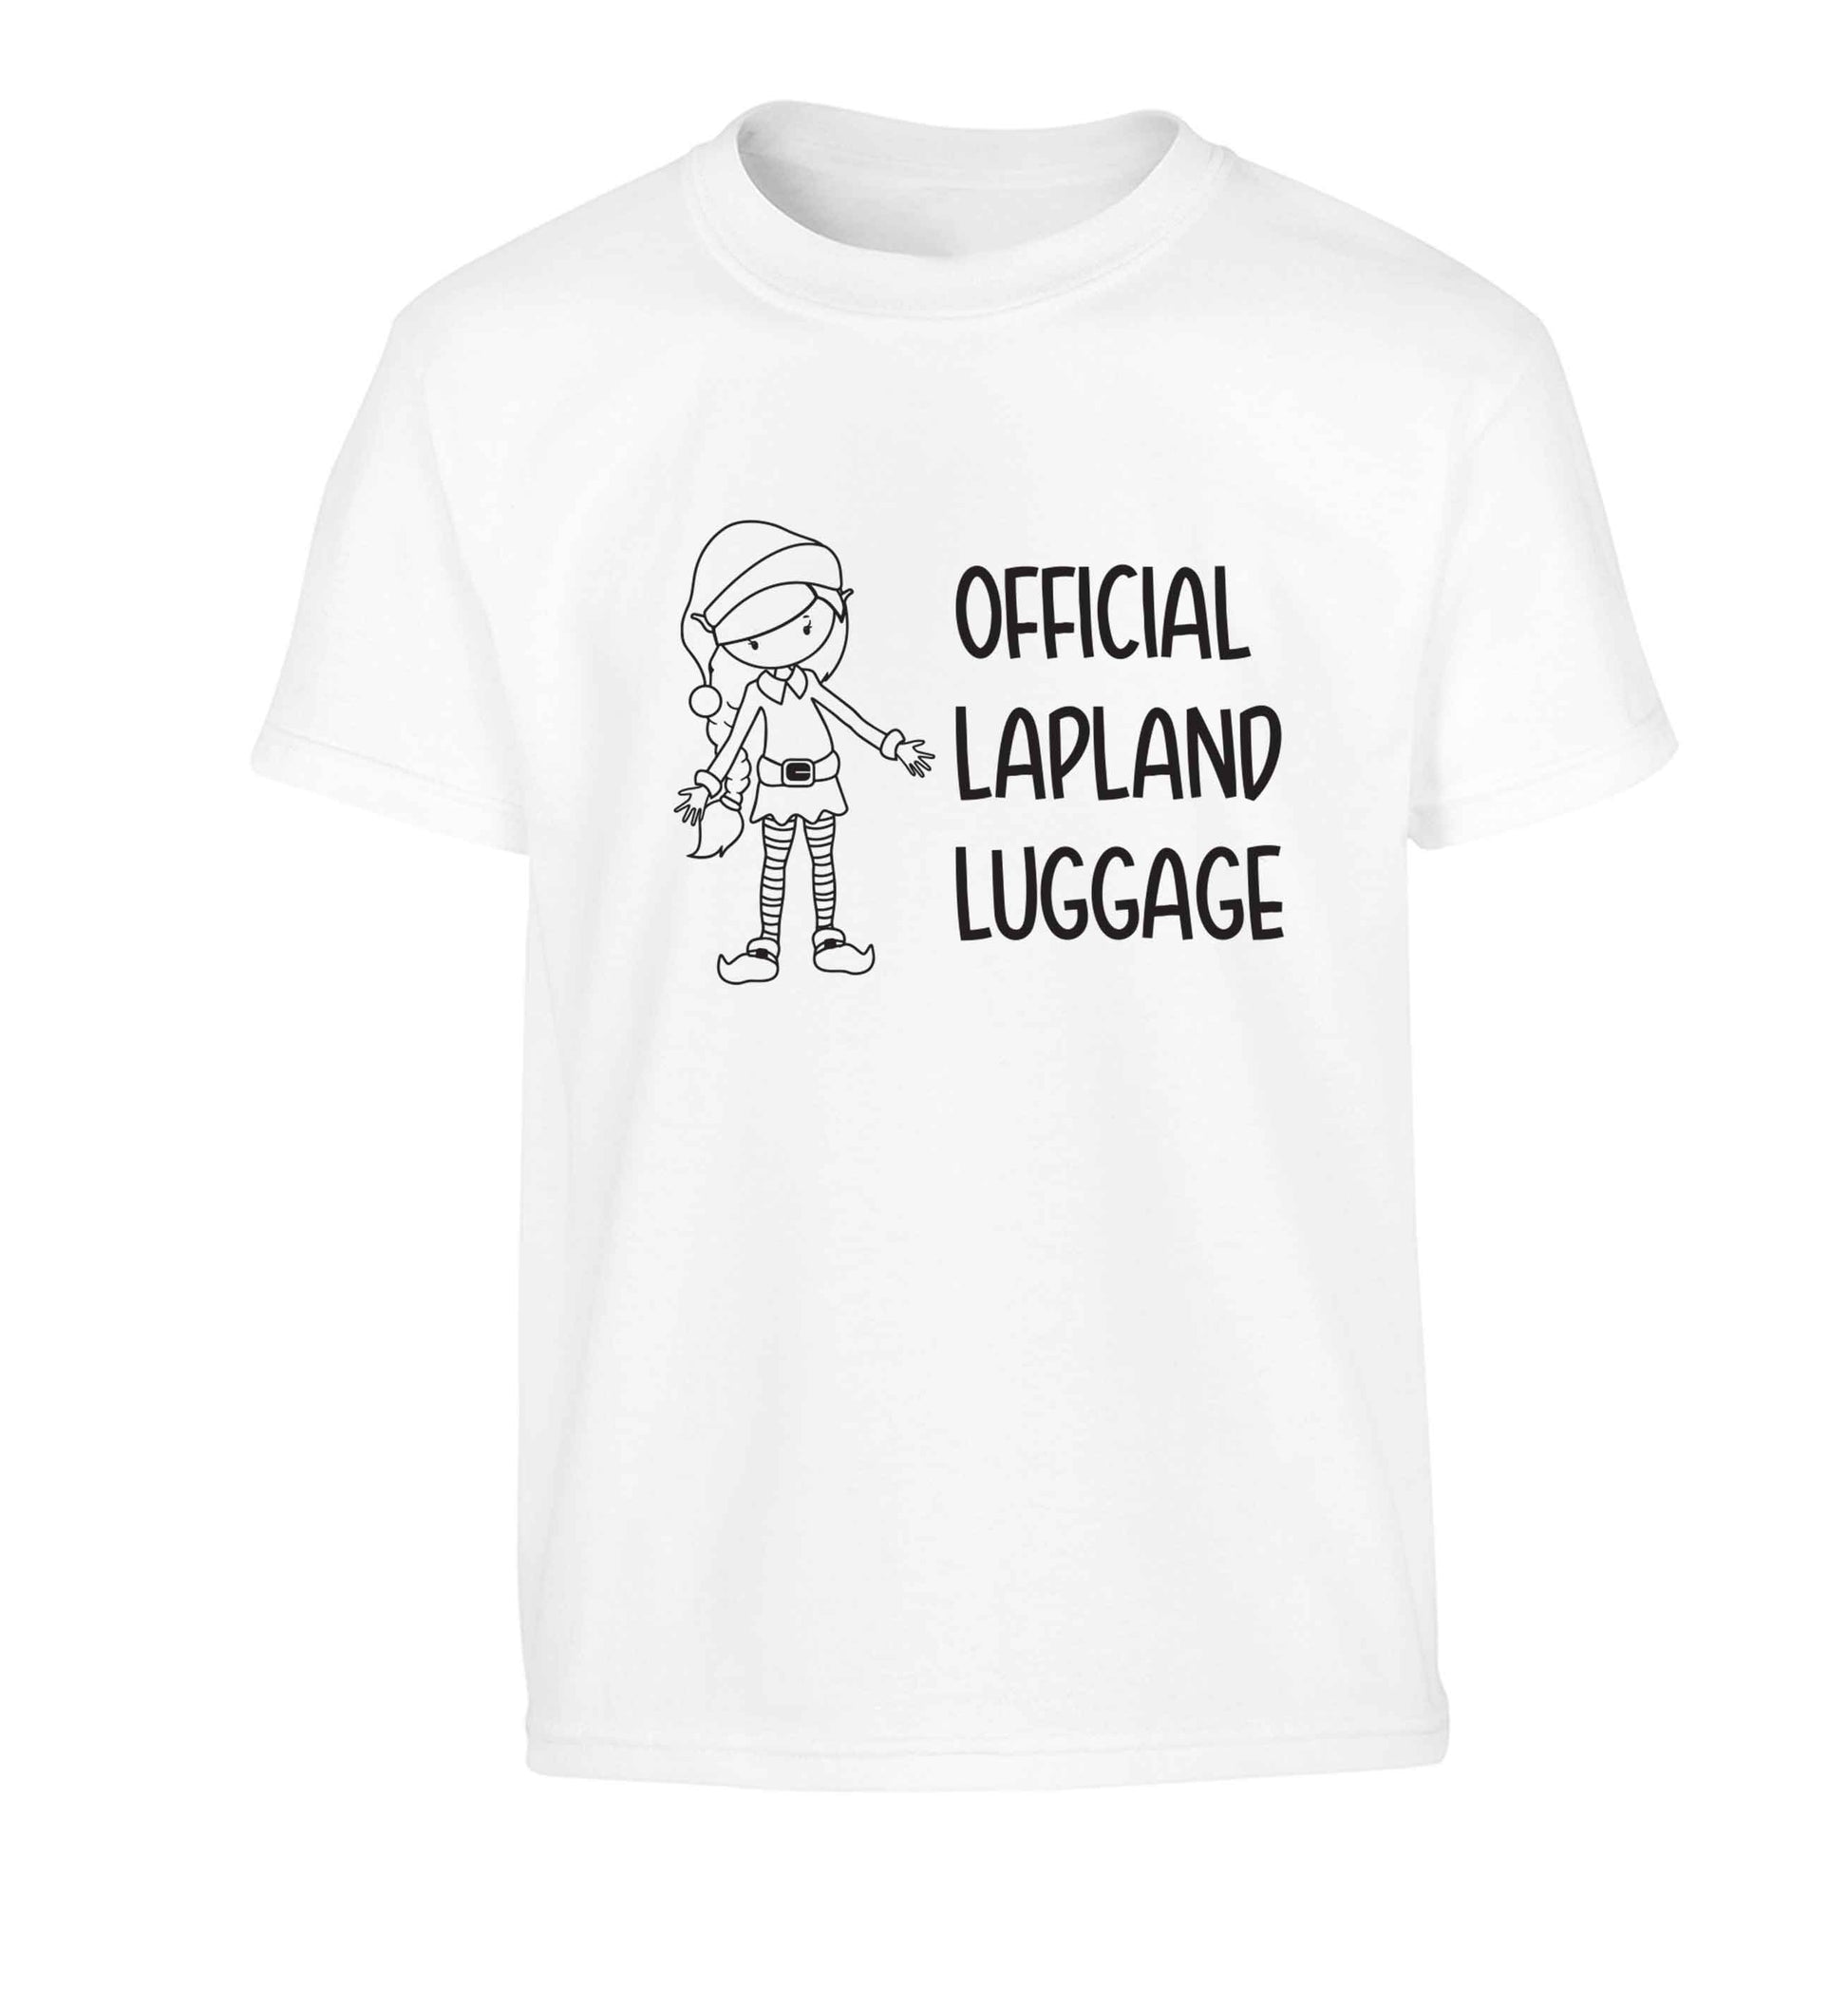 Official lapland luggage - Elf snowflake Children's white Tshirt 12-13 Years